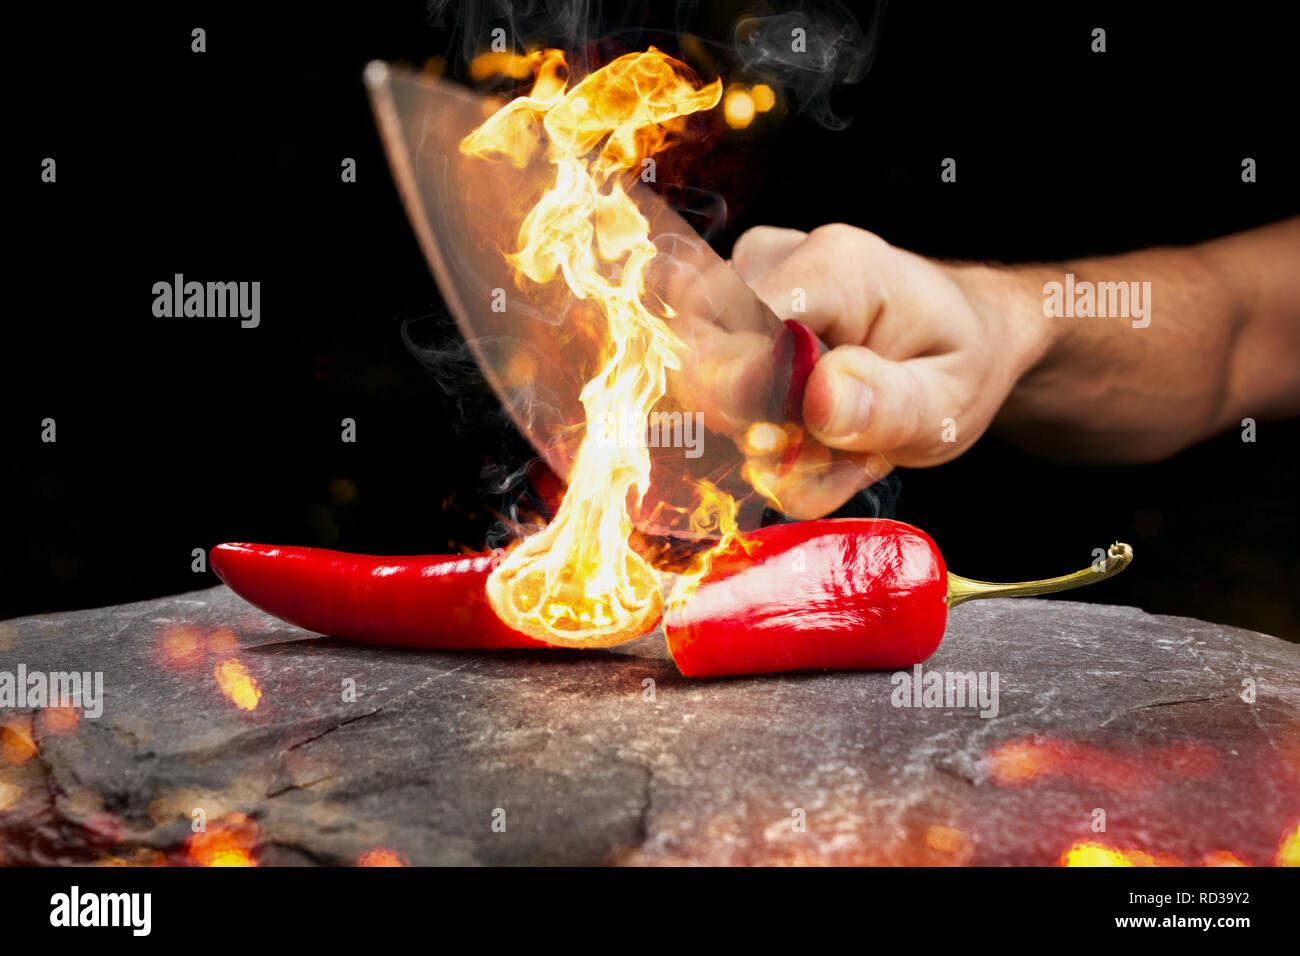 Cut chili pepper burning with an actual flame Stock Photo